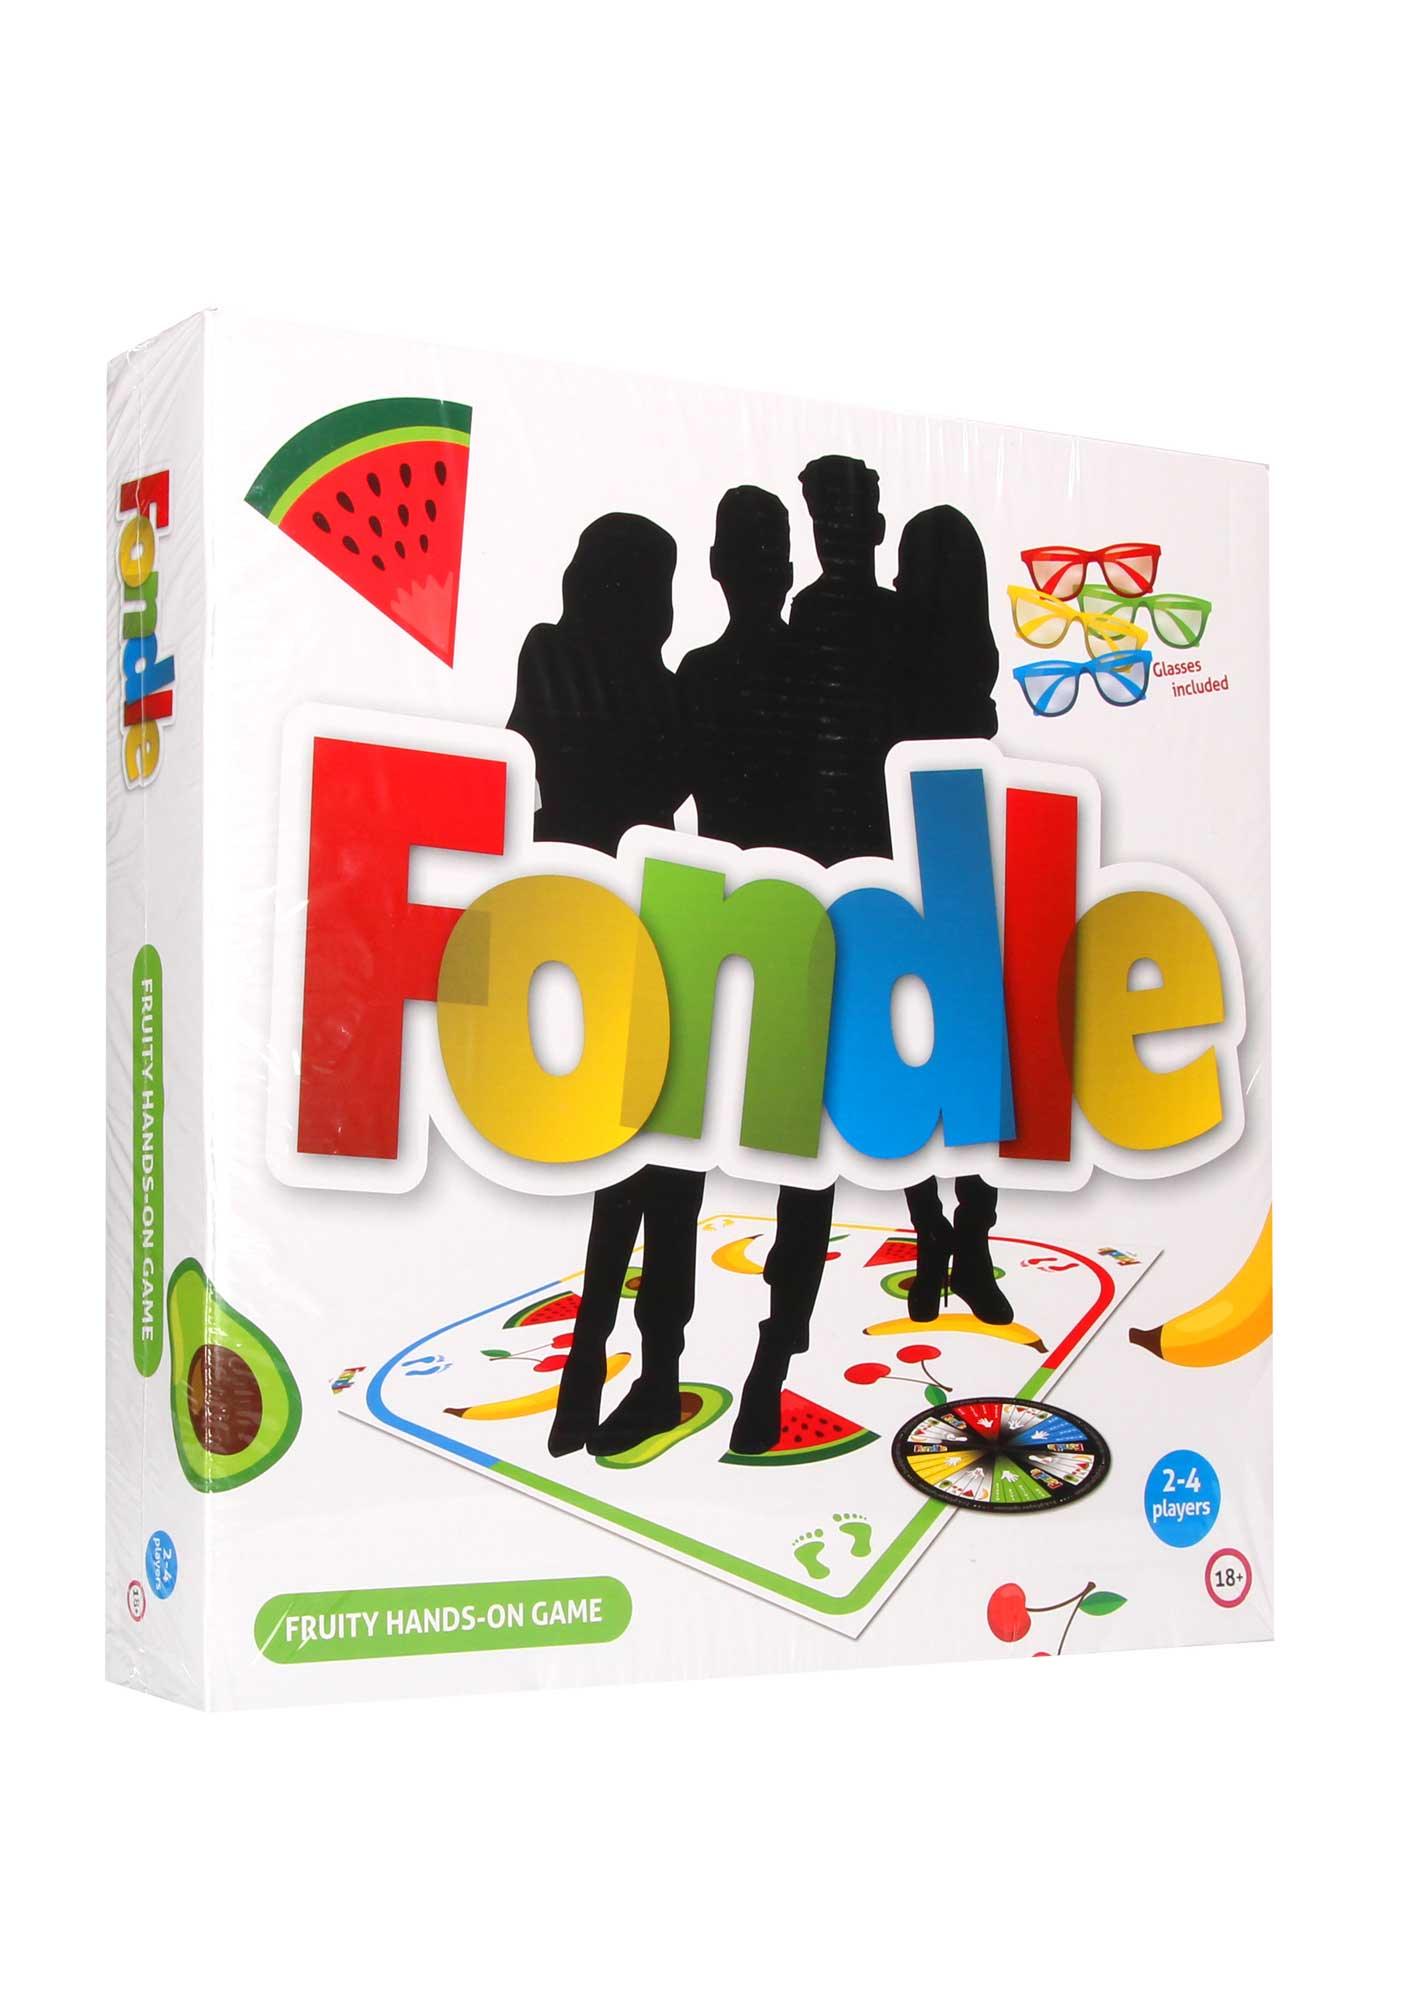 Fondle - Funny Party Game for Adults - My Sex Toy Hub